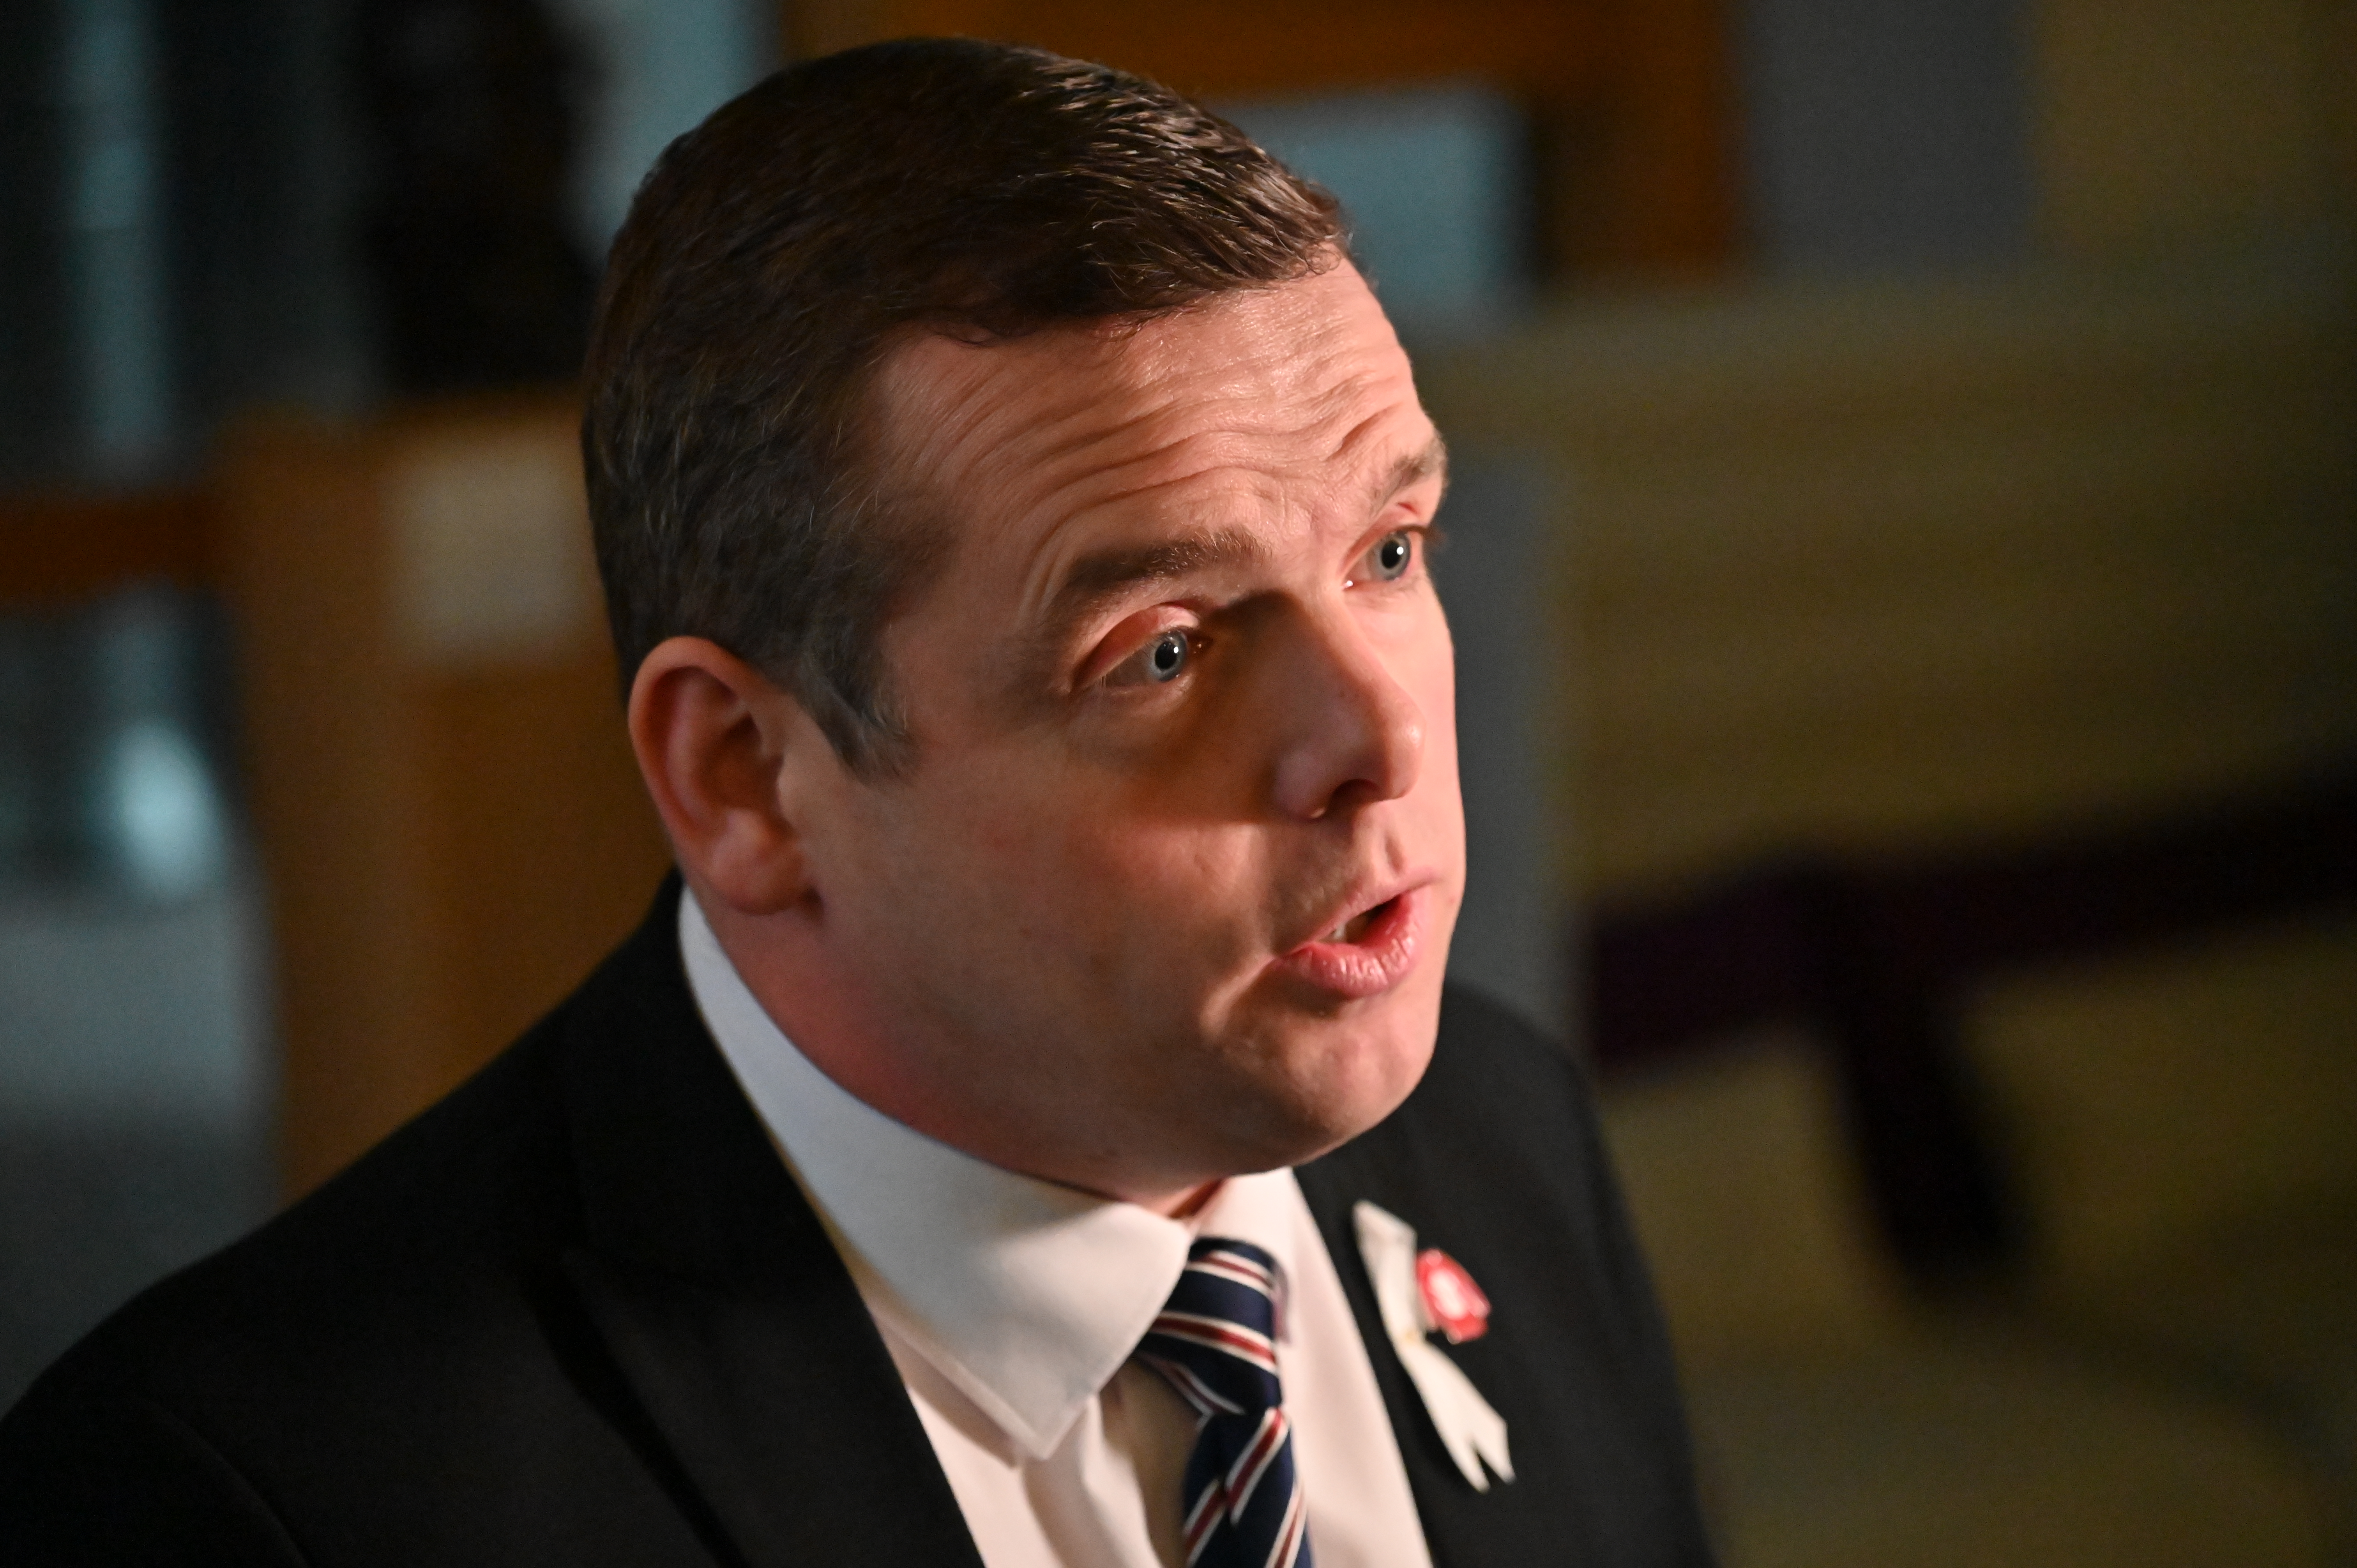 Douglas Ross said he was 'disappointed' with the chancellor's decision.